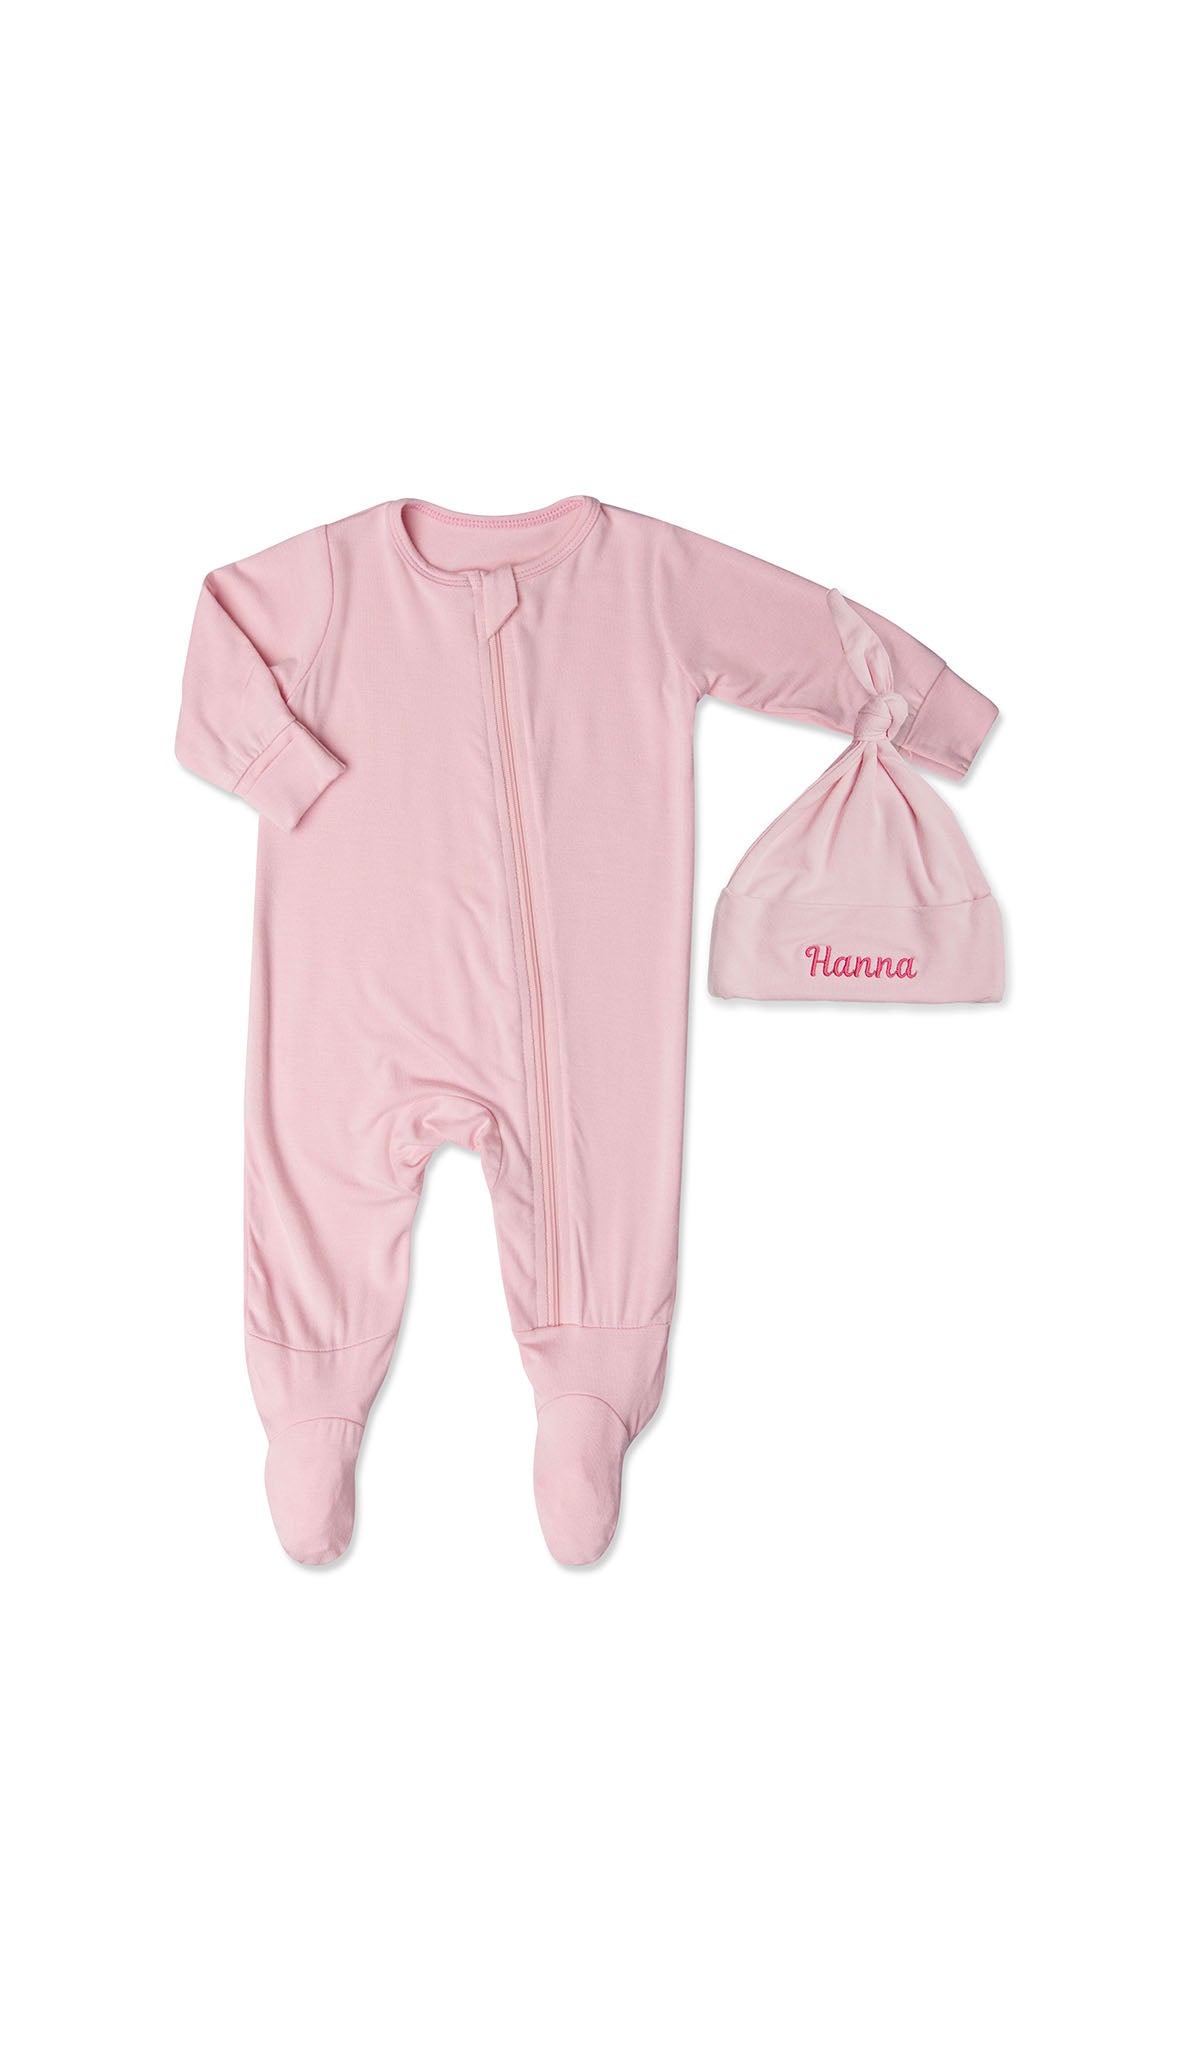 Personalized Footie 2-Piece - Blush comes with baby hat embroidered with baby's name.